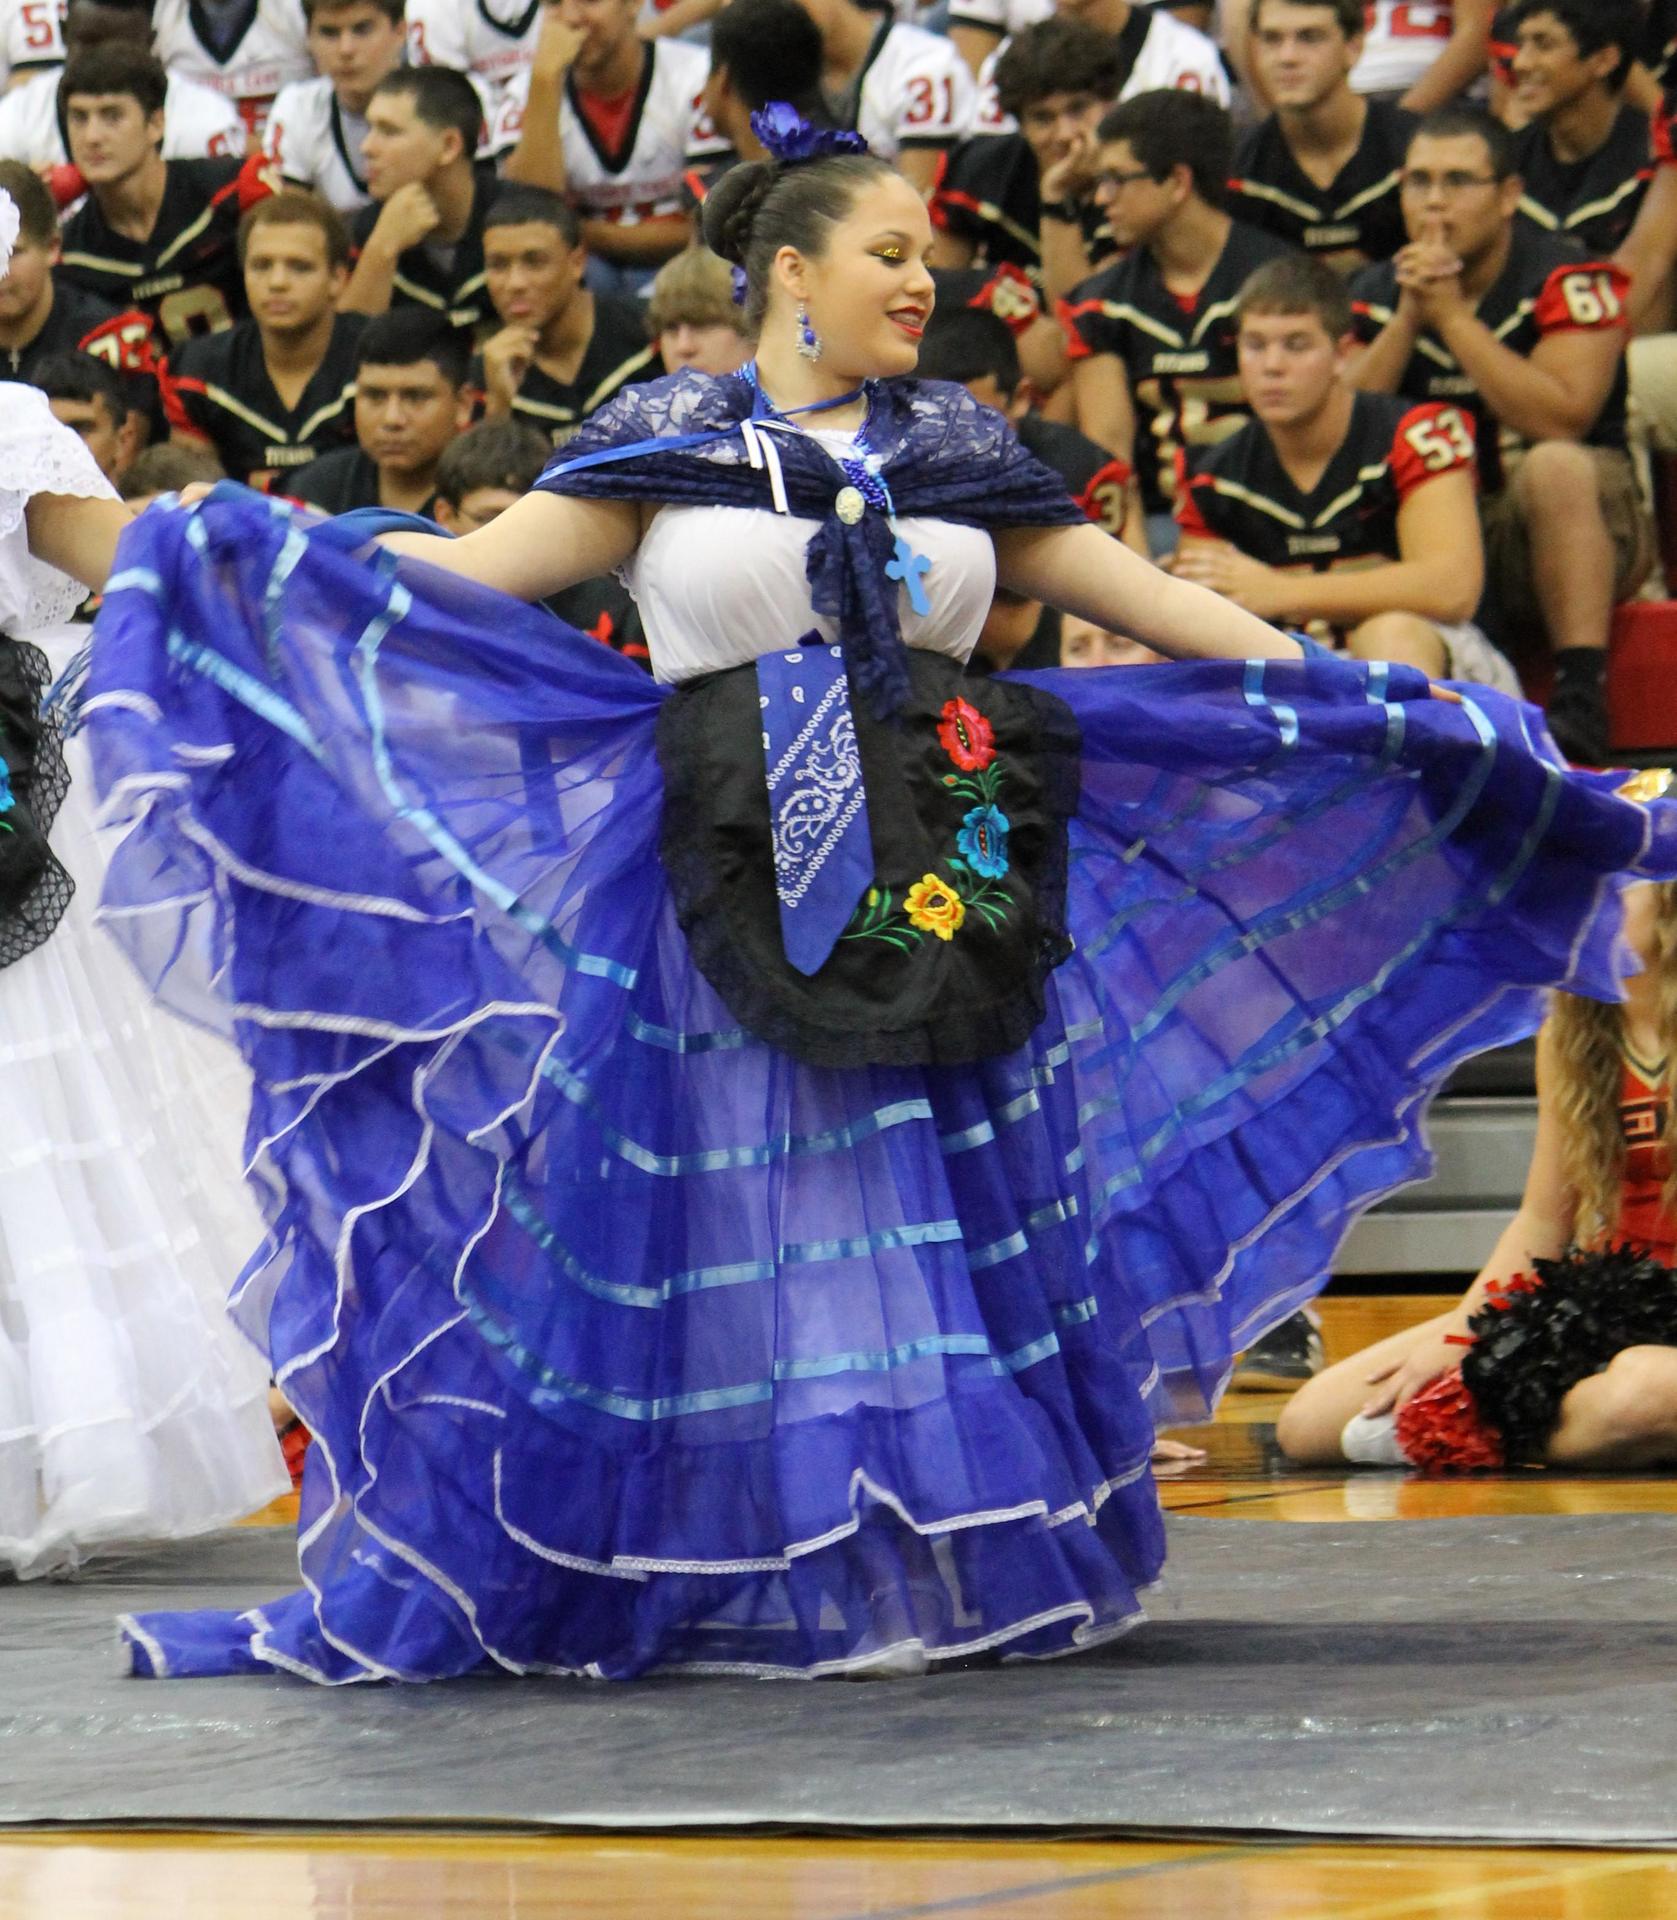 Ballet Folklorico:  Perfomer Dancing in a Blue dress